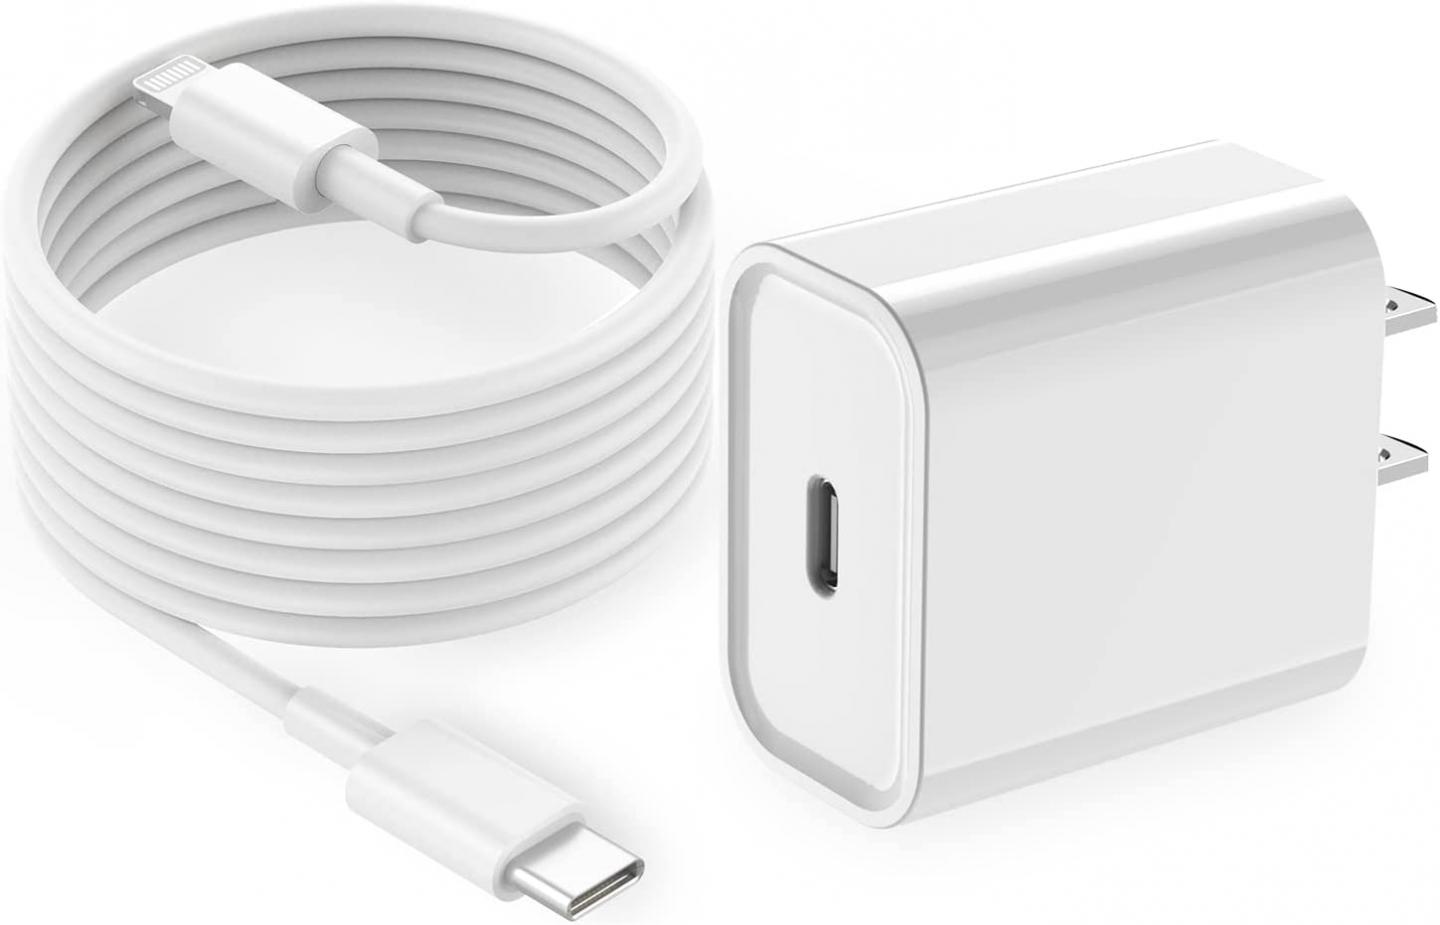 iPhone Fast Charger, 10 FT Long [Apple MFi Certified]USB C to Lightning Cable 10 Foot Cord with 20W Type C Wall Charger Block Plug Box Power Adapter Compatible for iPhone 13/12/11/Pro/Max/X and More